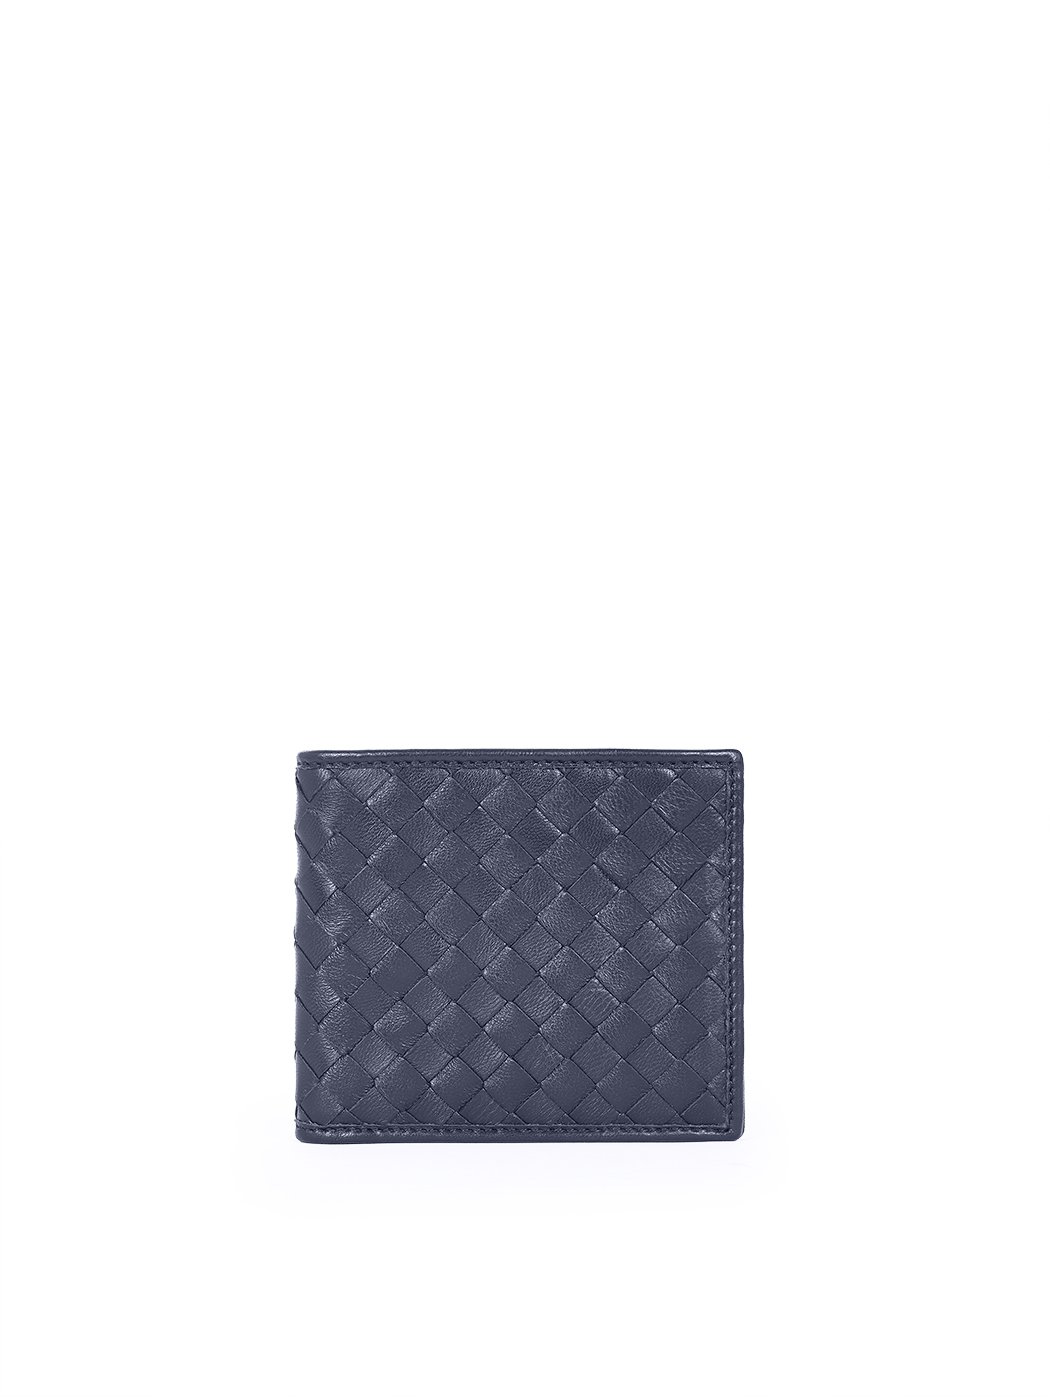 Blue woven leather wallet